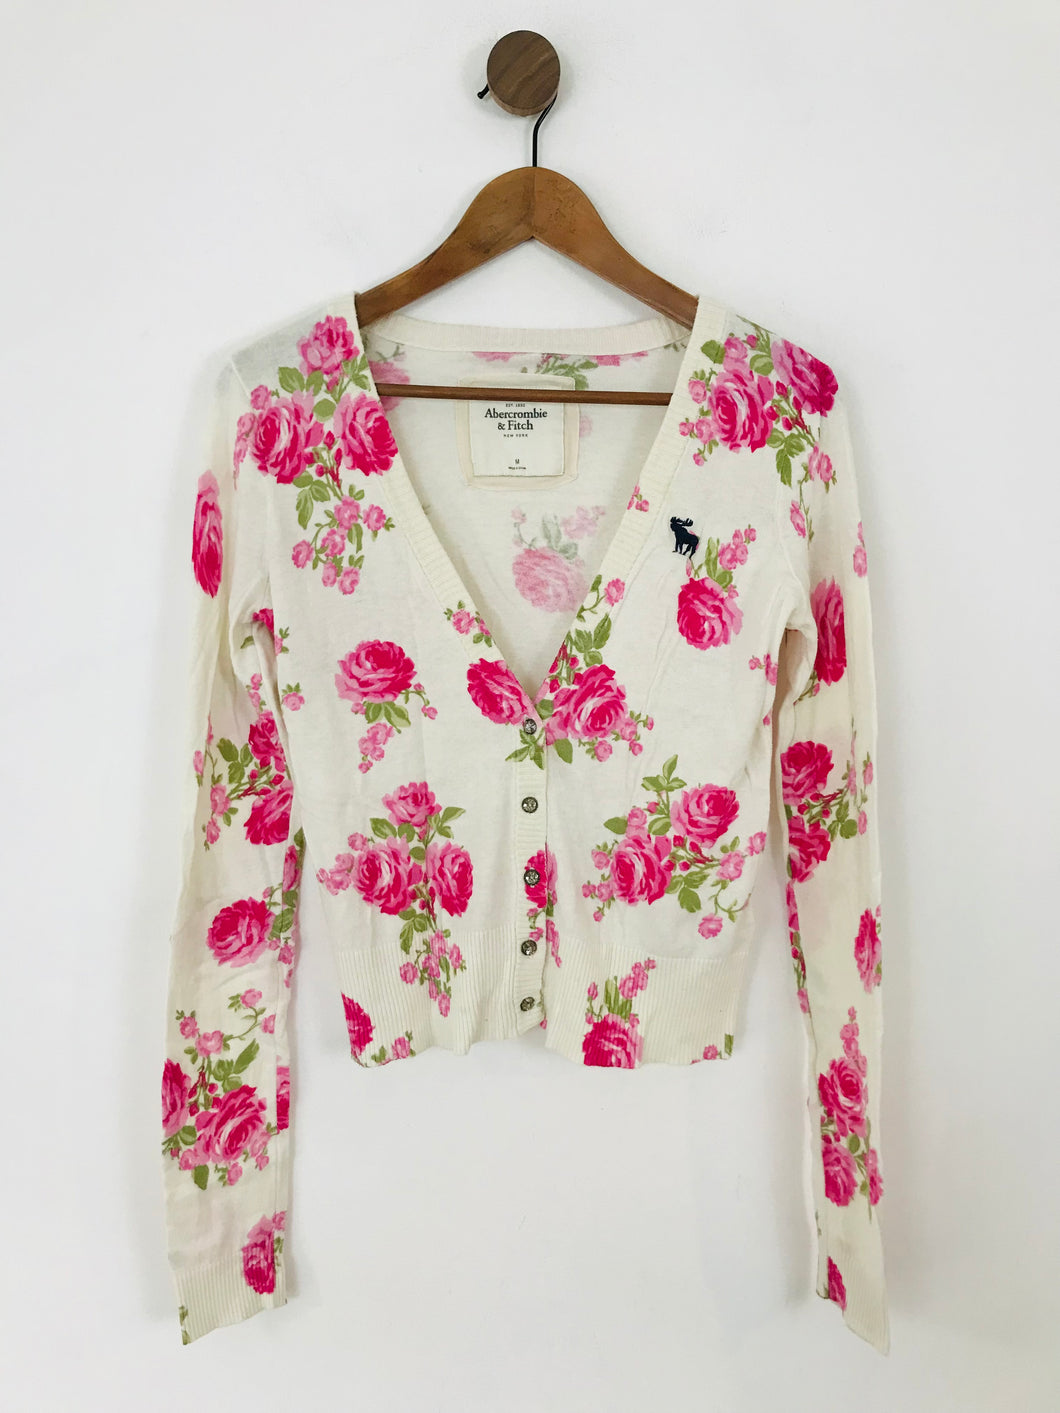 Abercrombie & Fitch Women's Floral Cardigan | M UK10 | White